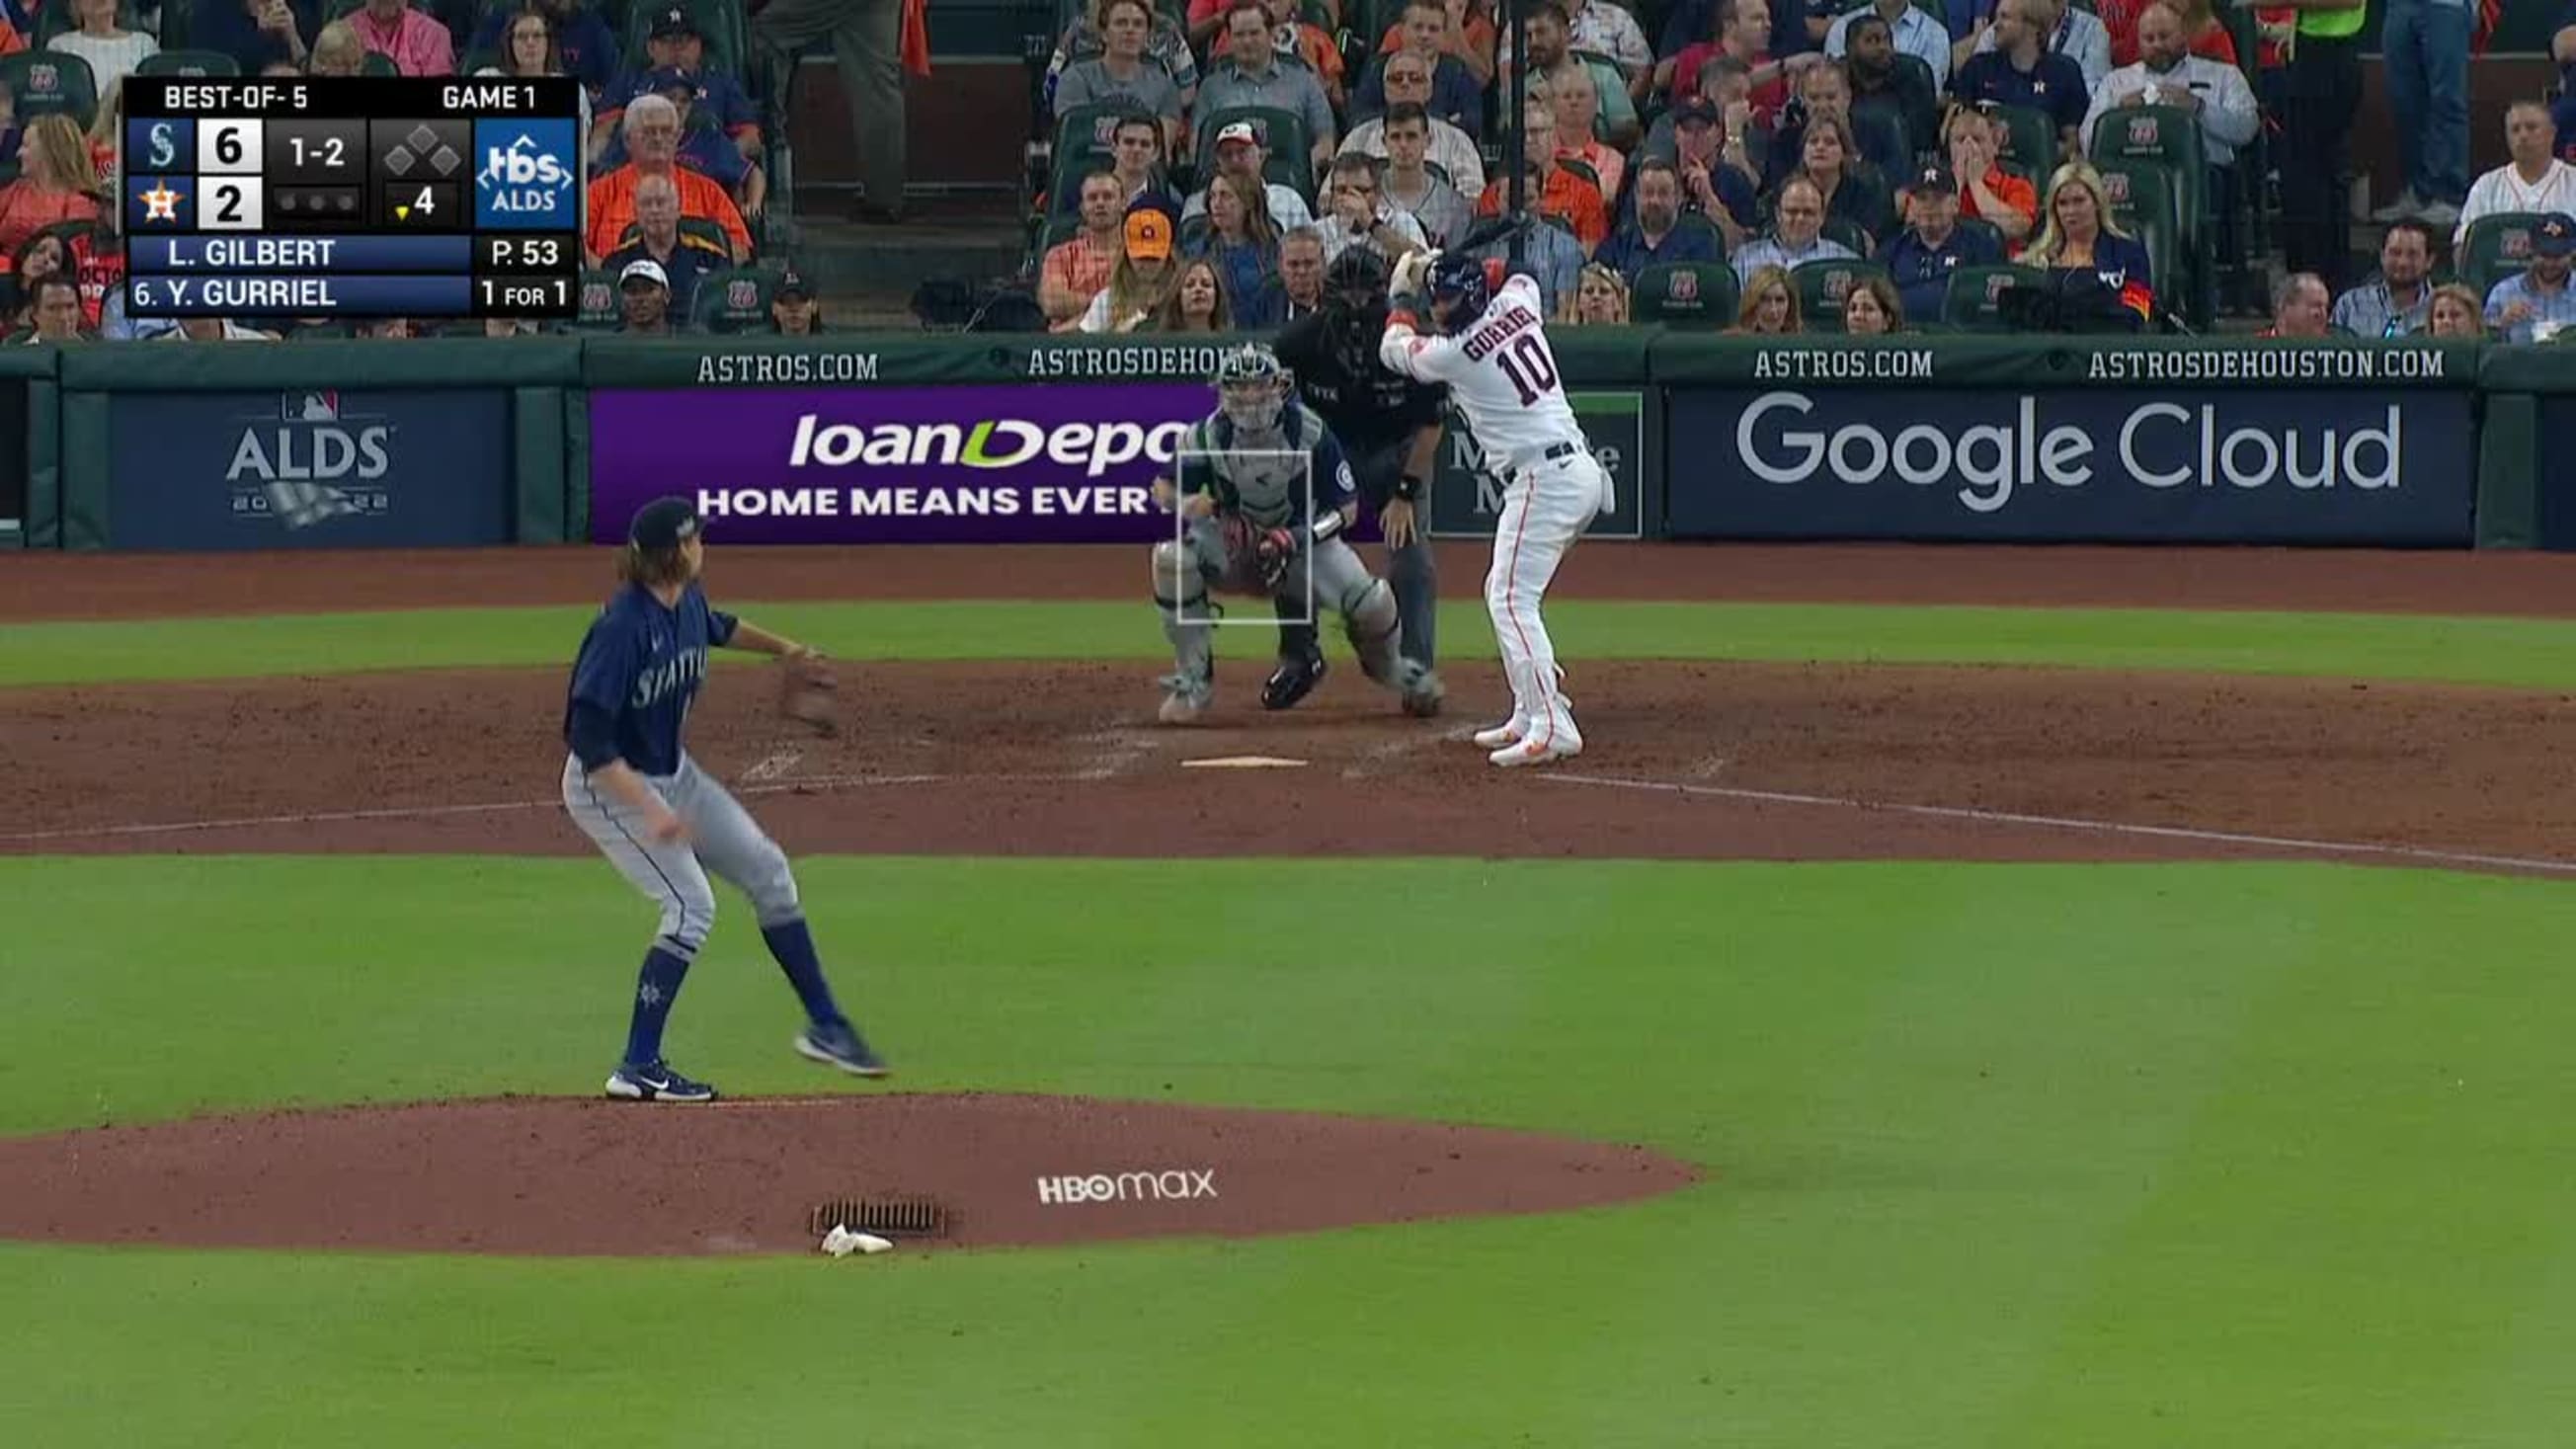 Yuli Gurriel HR, Yulieski Gurriel, Yuli Gurriel's solo shot gets the  @Marlins on the board! 𝘞𝘢𝘵𝘤𝘩 𝘵𝘩𝘦 𝘨𝘢𝘮𝘦 →   By Bal